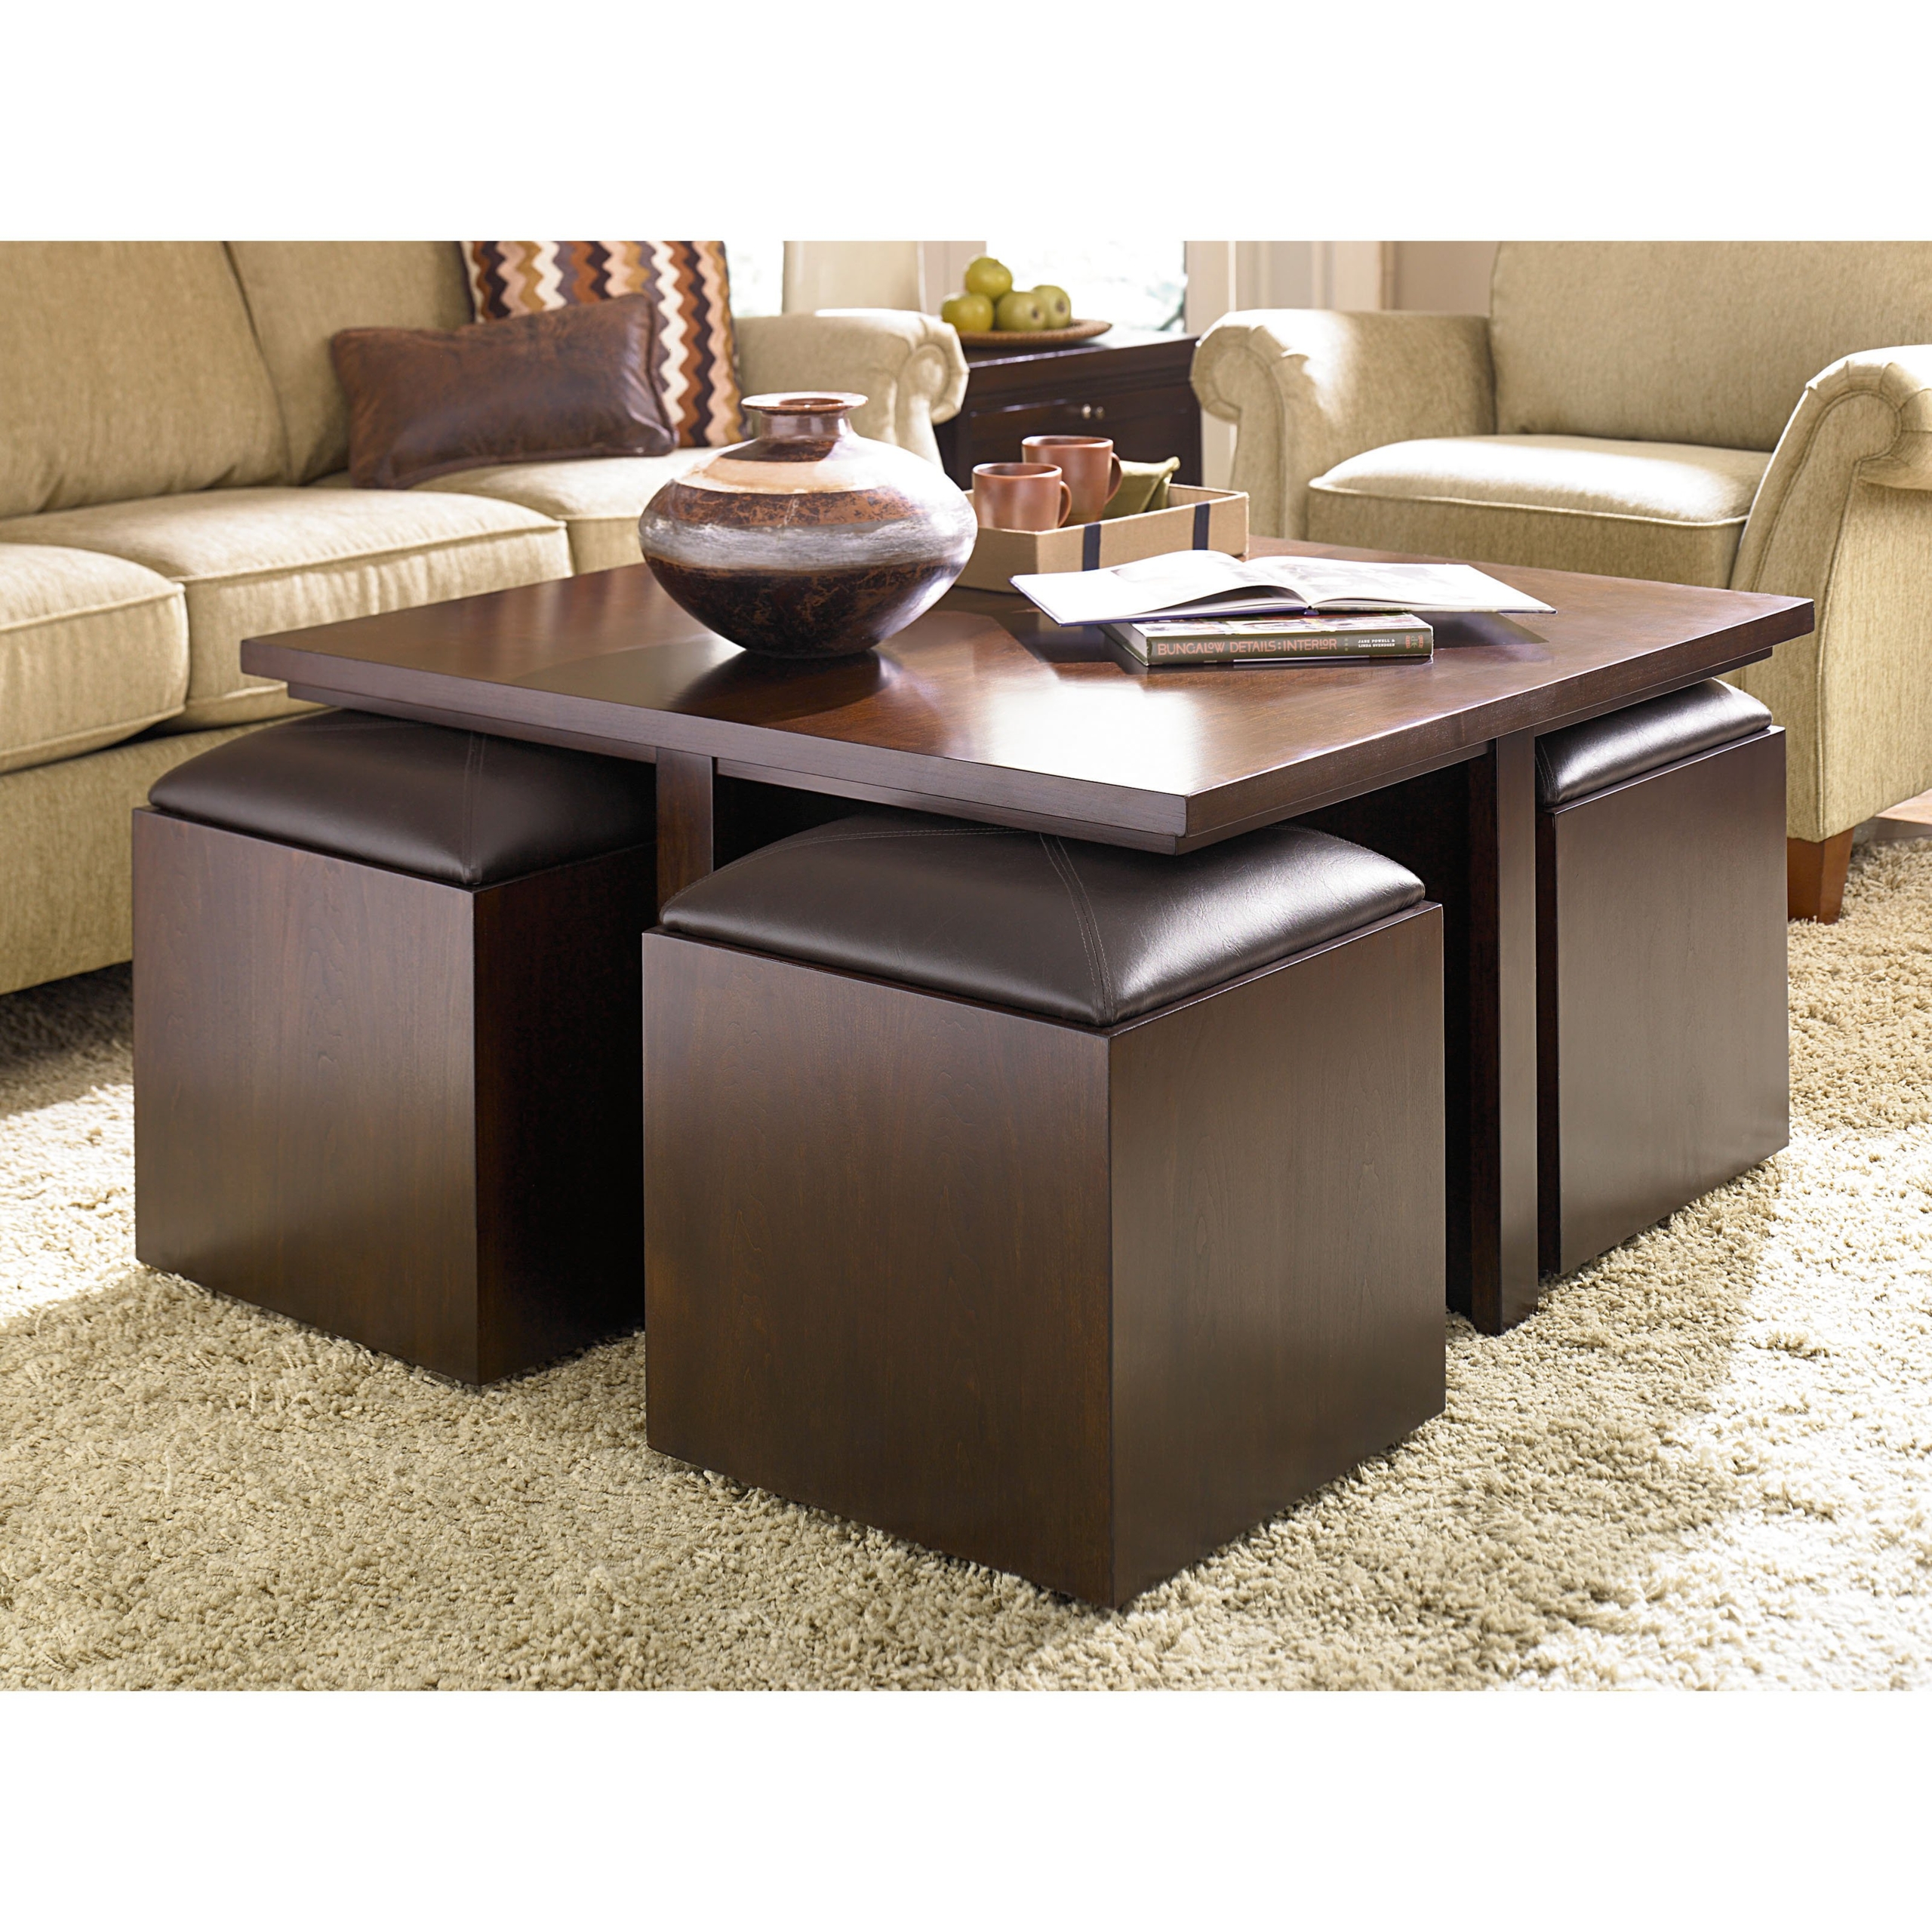 Hammary cubics coffee table with nested ottomans